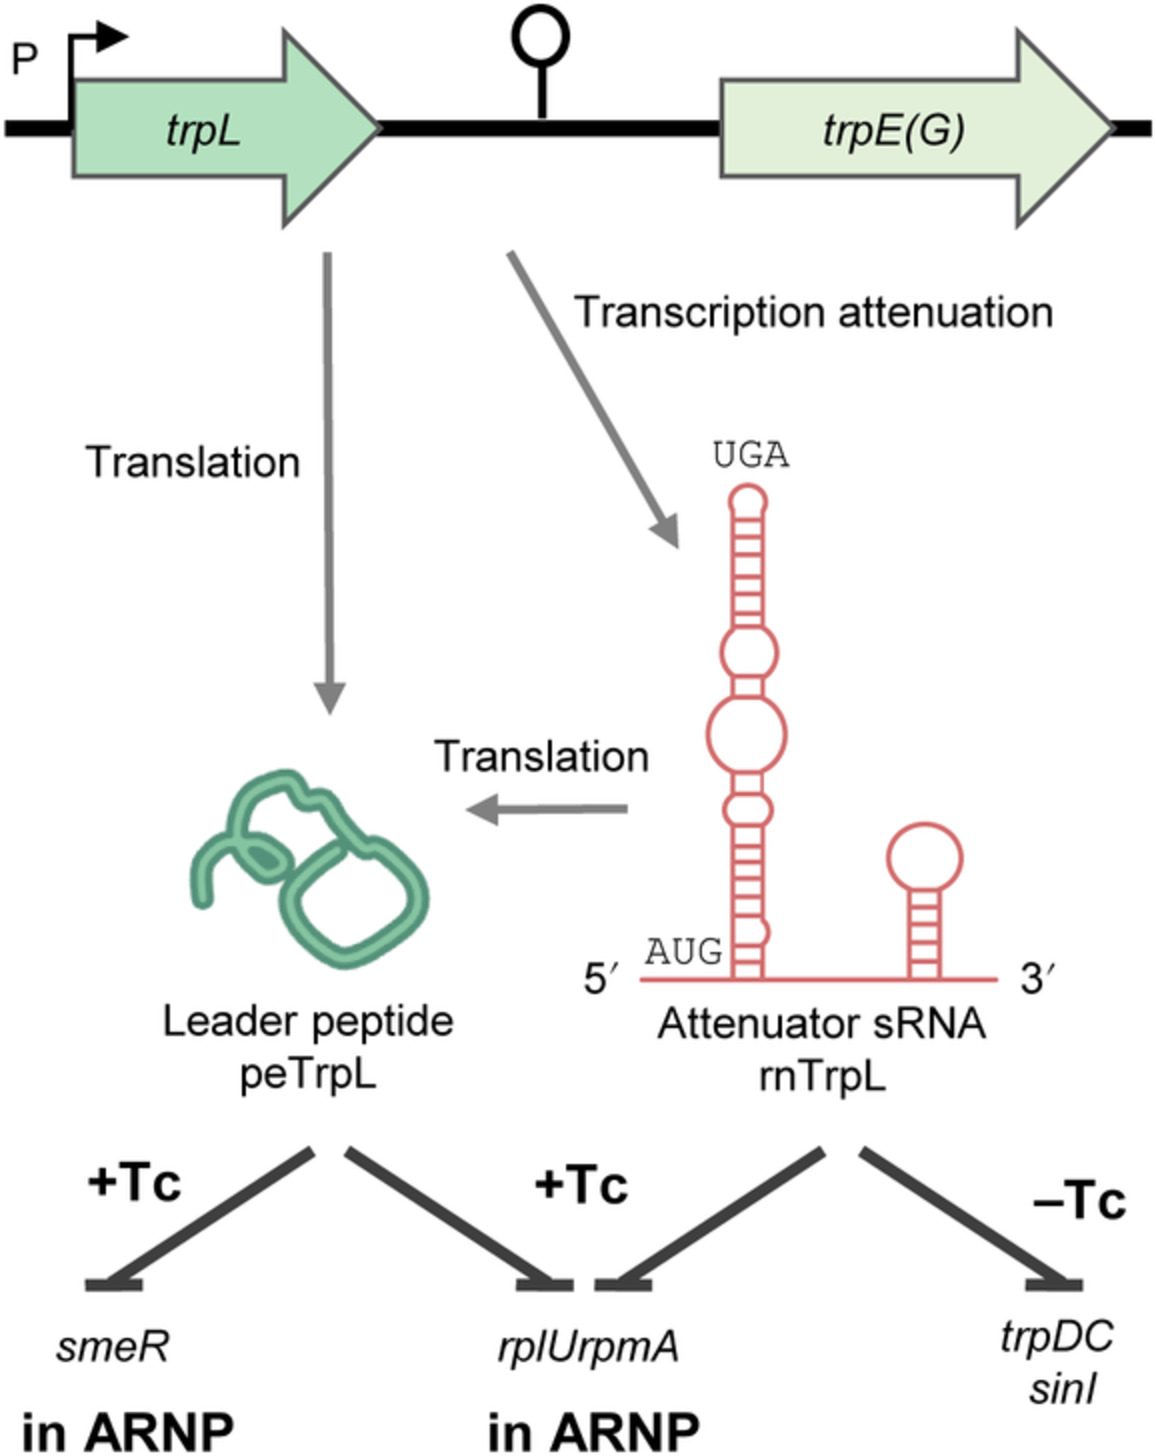 Riboregulation in bacteria: From general principles to novel mechanisms of the trp attenuator and its sRNA and peptide products